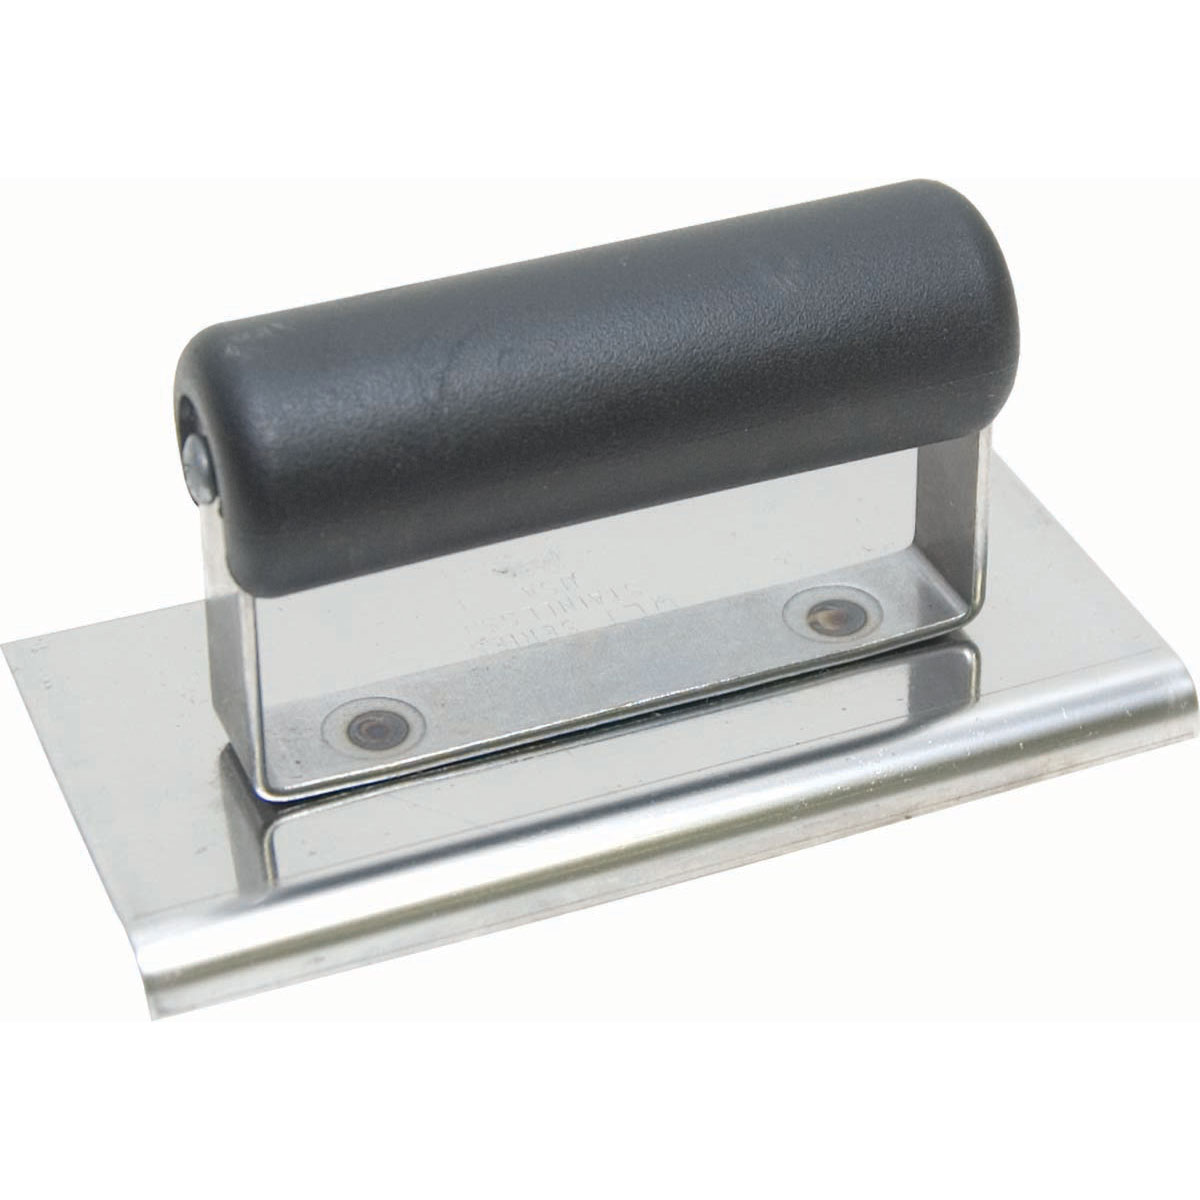 Marshalltown - QLT CE503SP 6in x 3in Stainless Steel Edger; 1/8R, 1/4L-Plastic Handle CE503SP